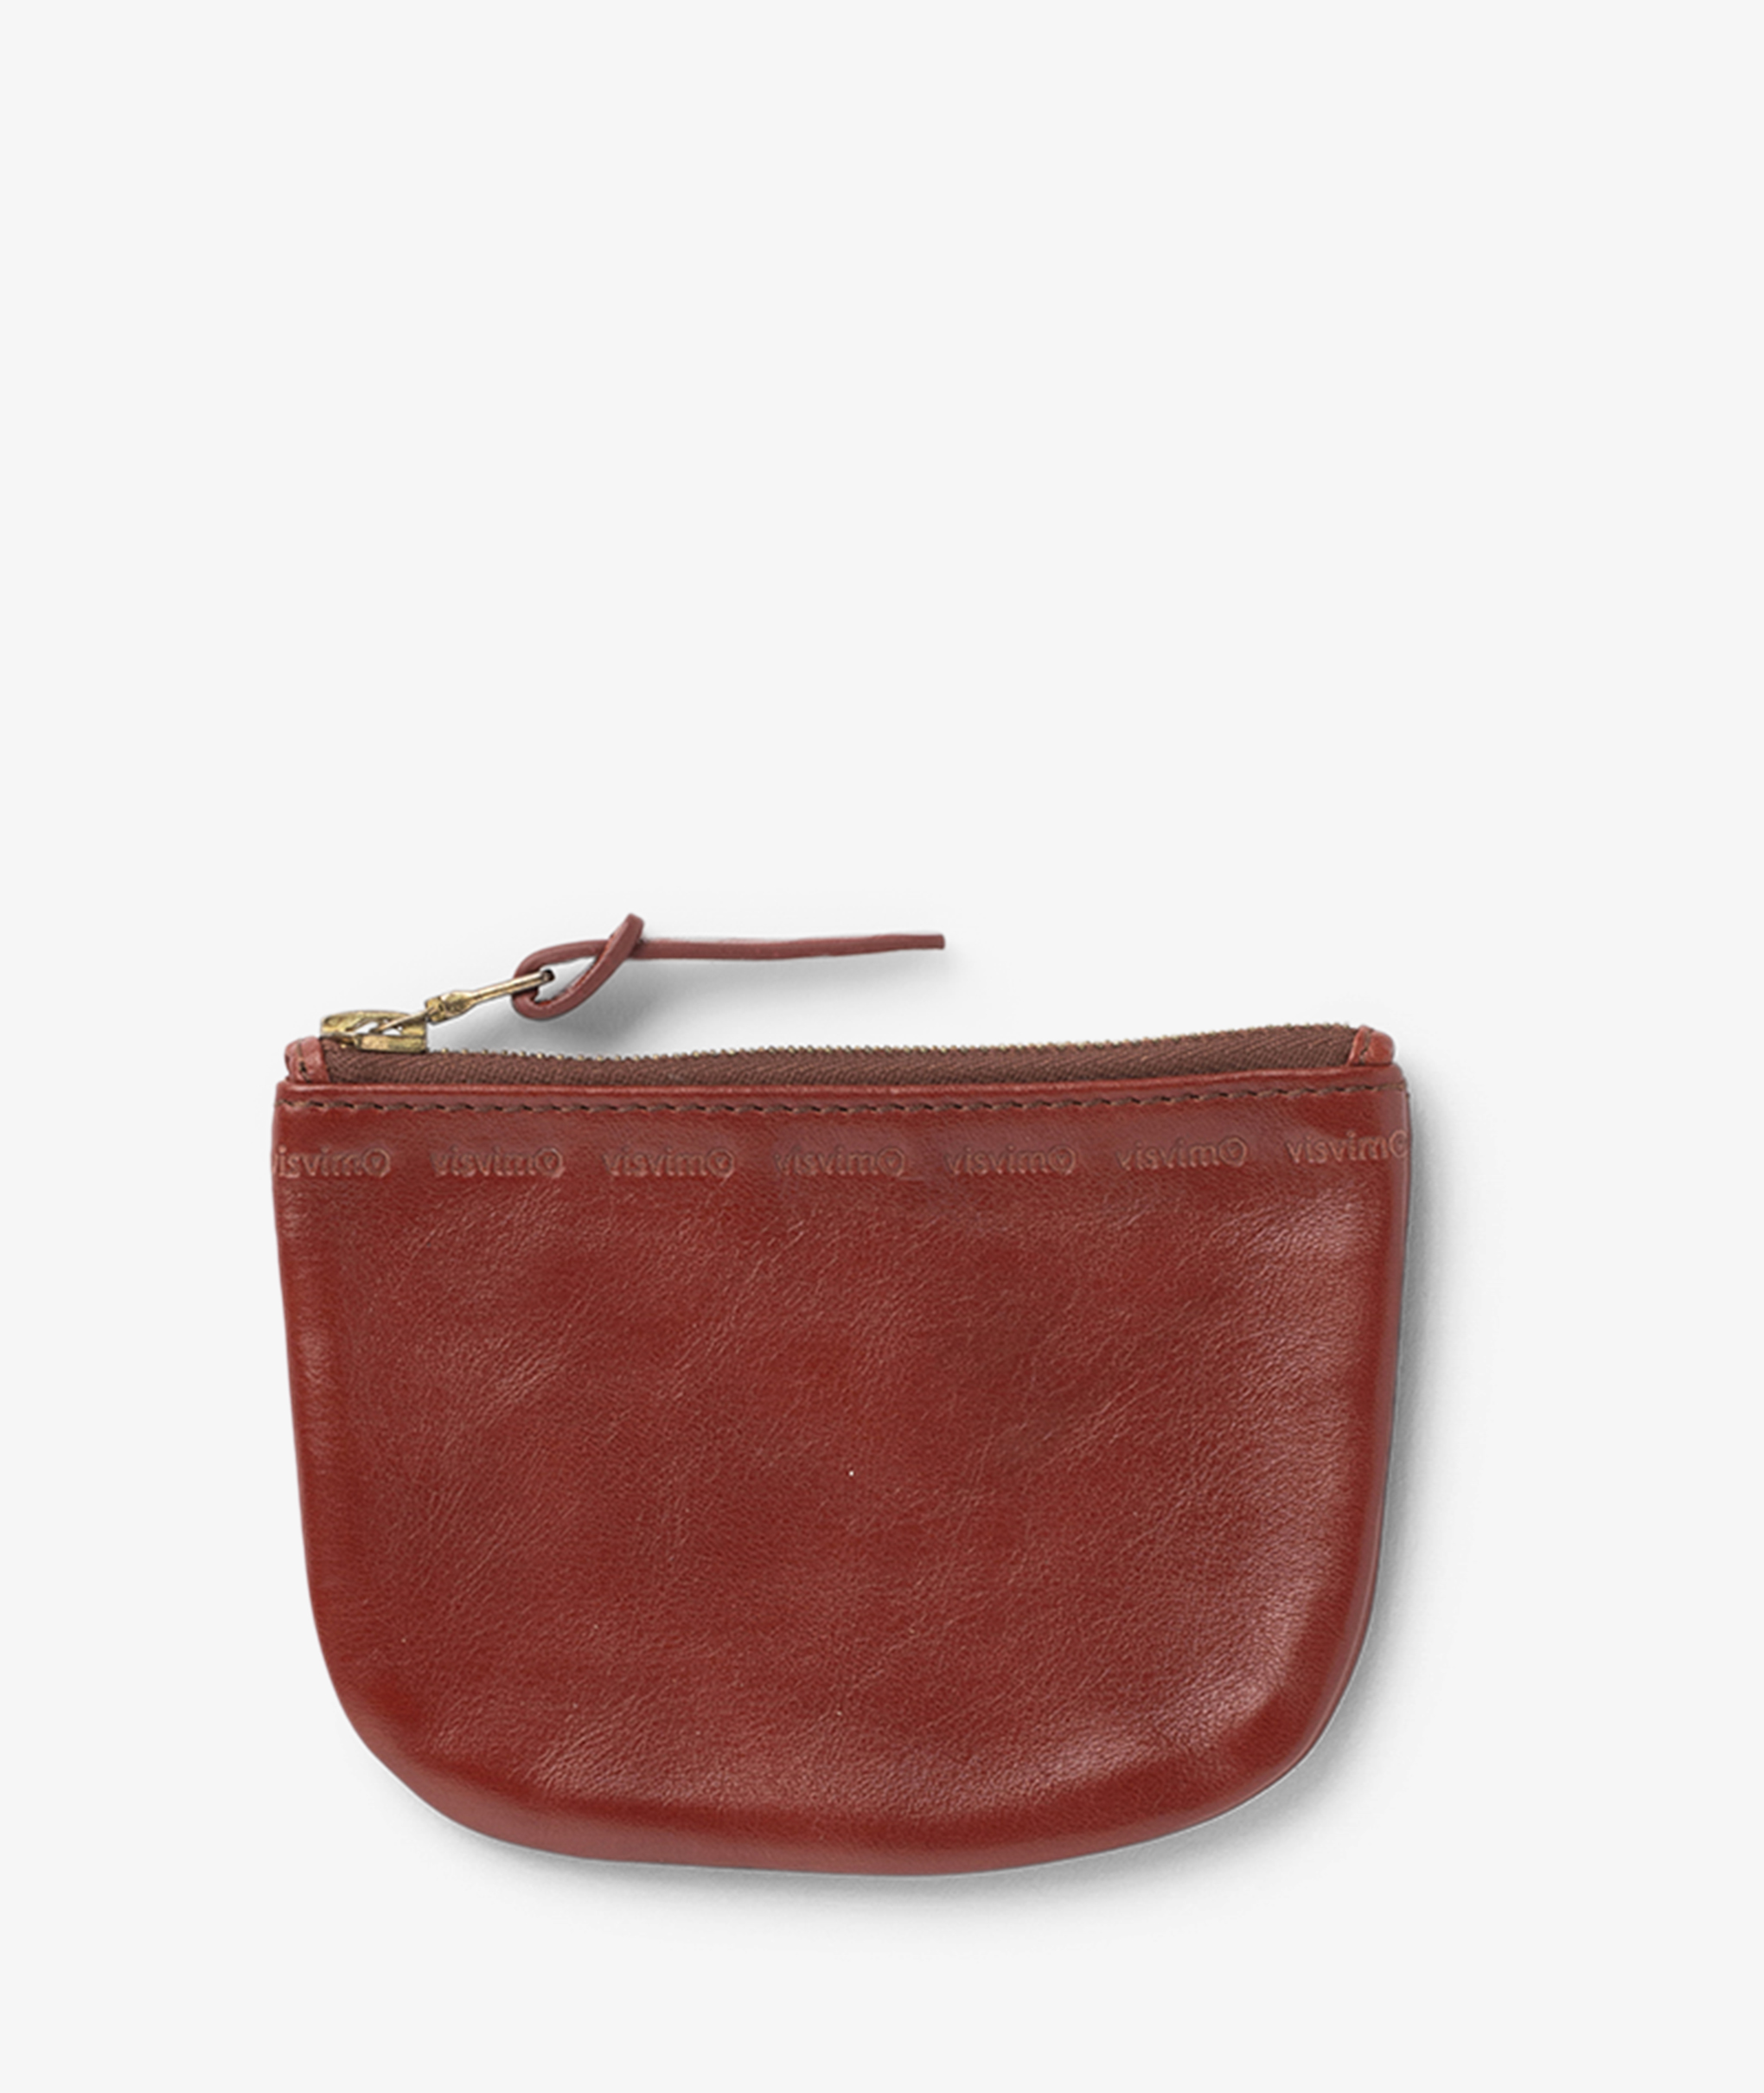 Norse Store | Shipping Worldwide - Visvim Leather Wallet - Brown